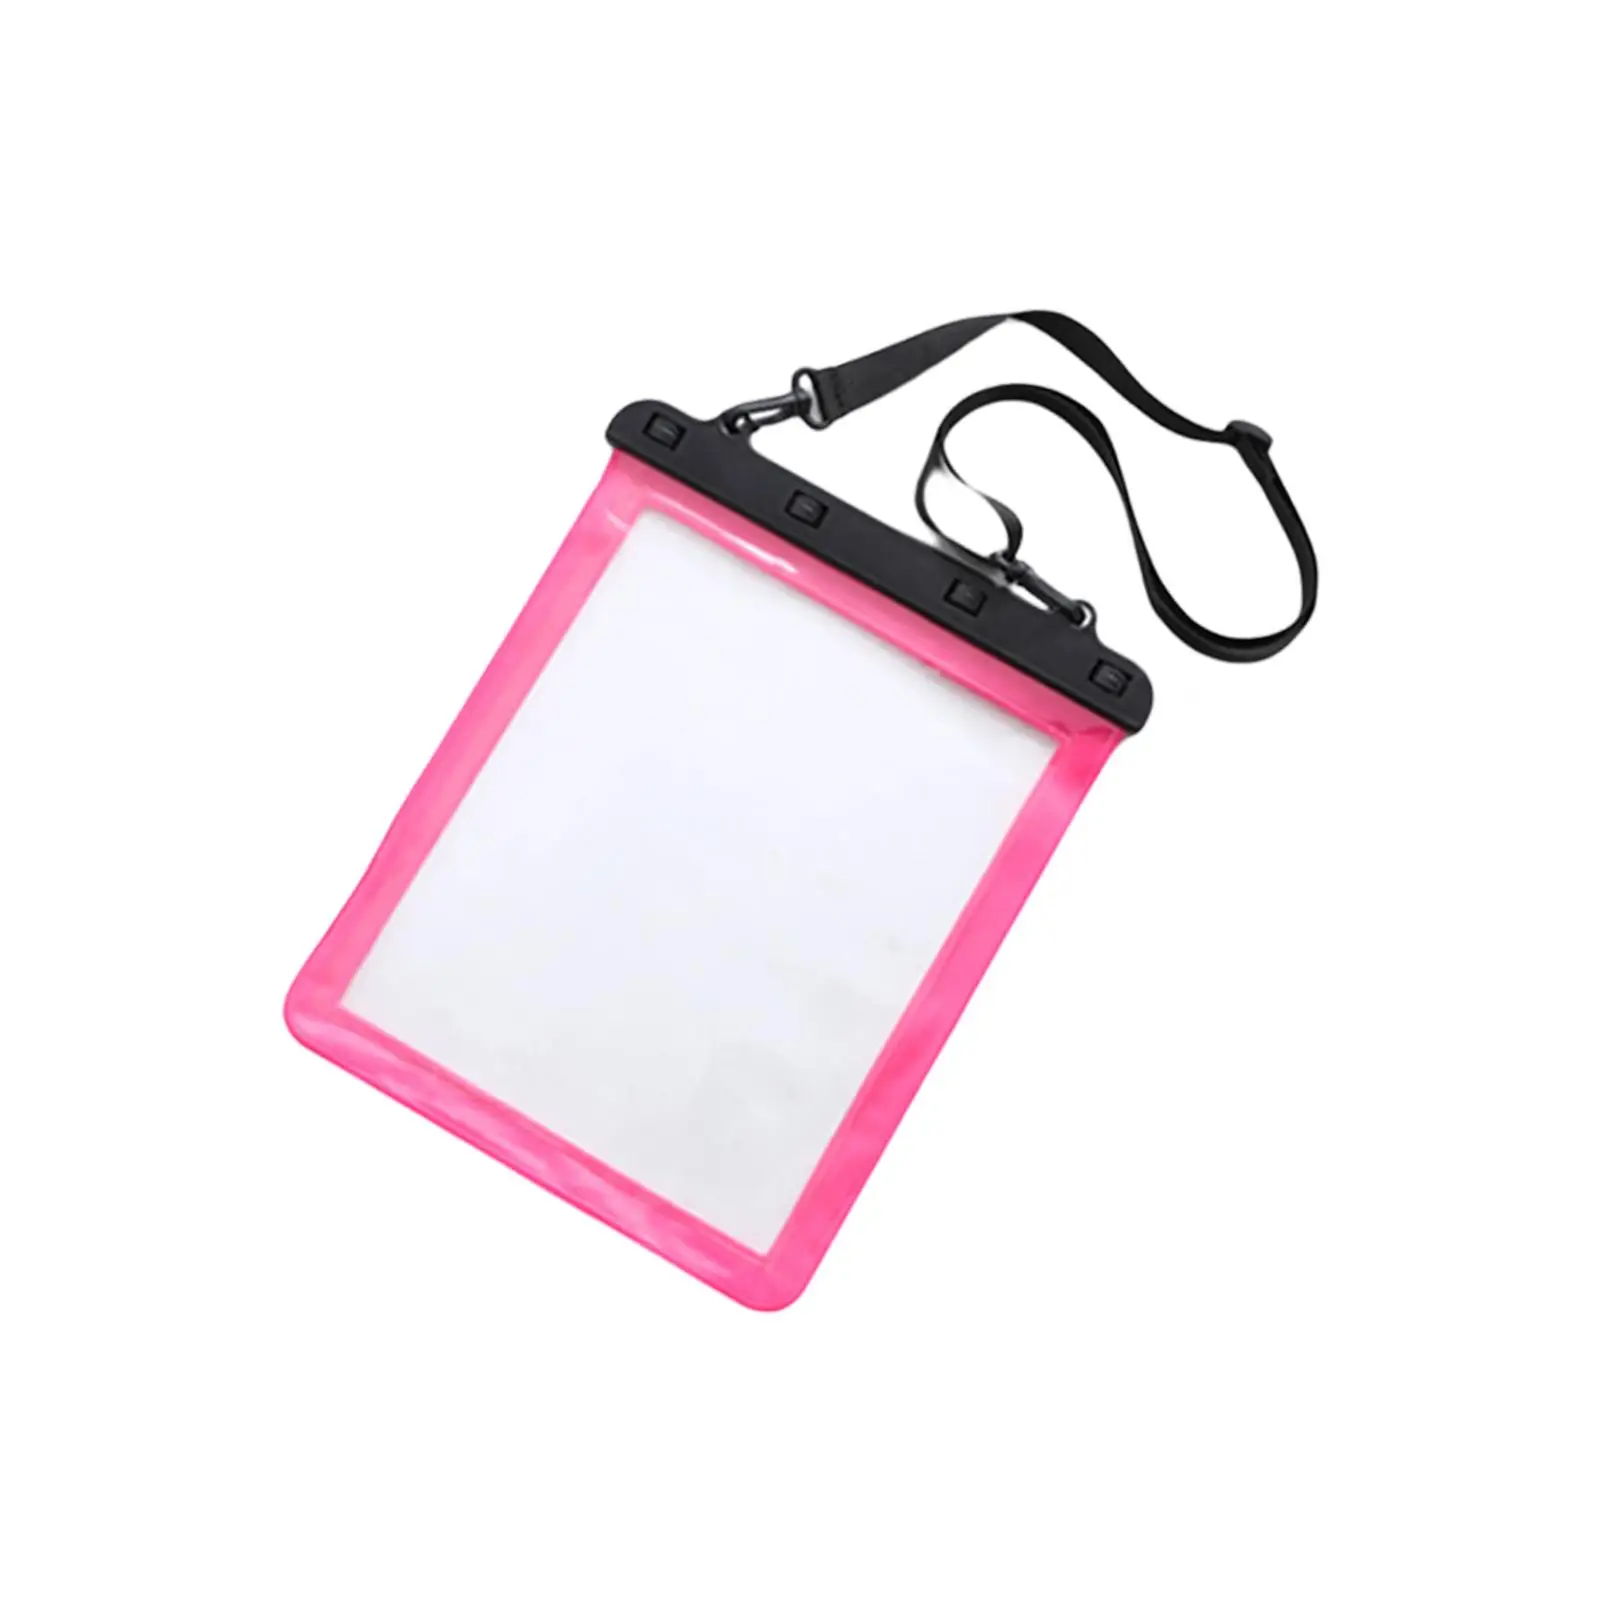 Clear Waterproof Bag Lightweight with Detachable Shoulder Strap Clear Tote Bag for Travel Rafting Swimming Fishing Water Sports